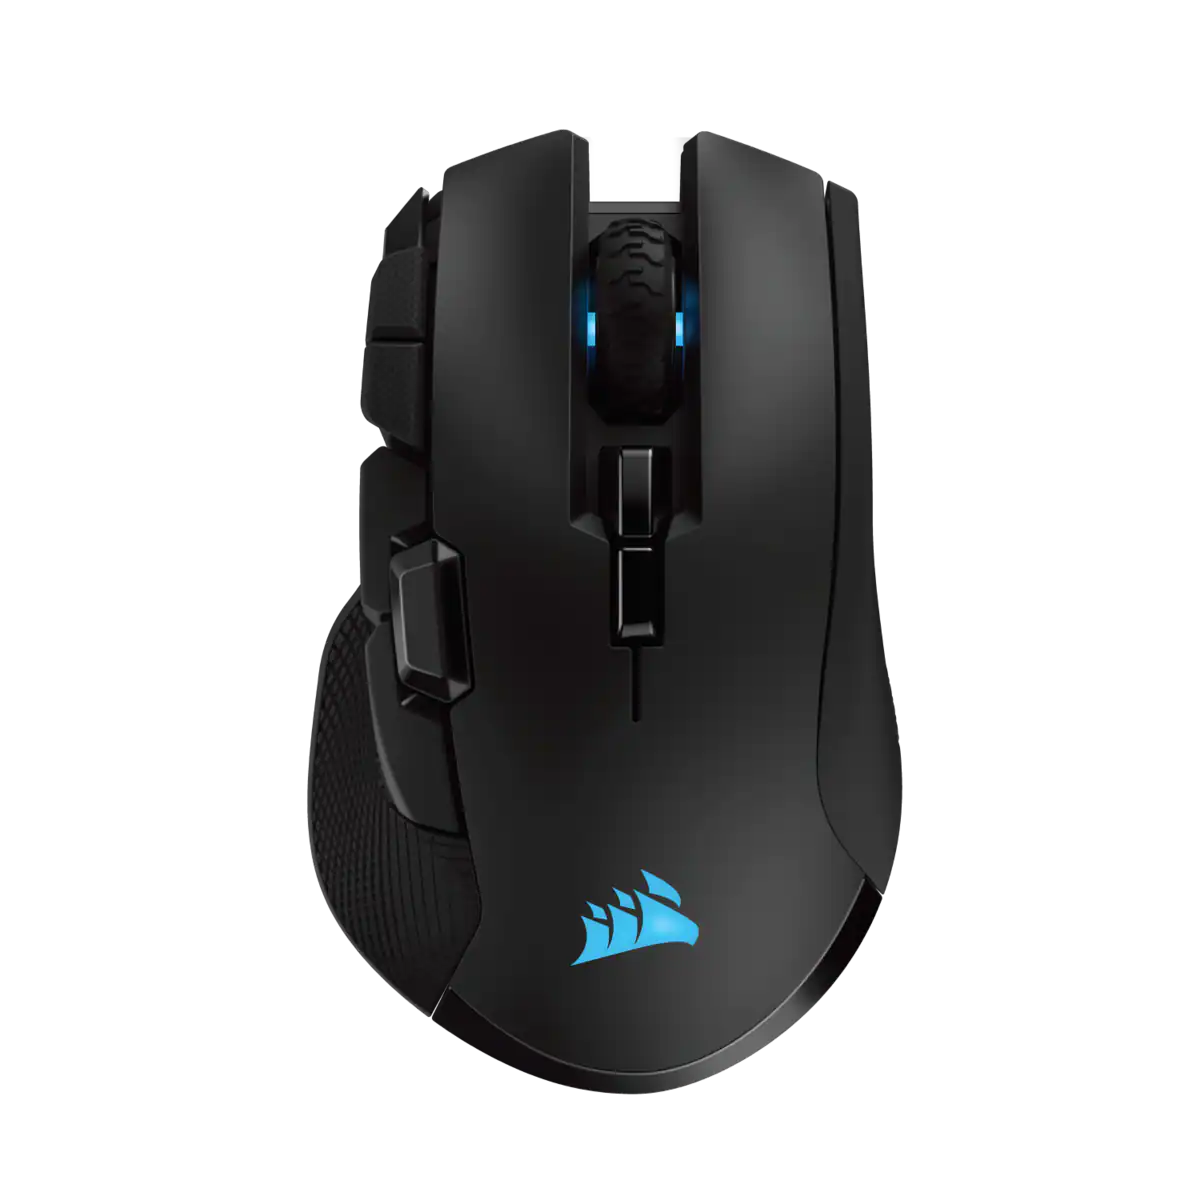 [COACRVCH-9317011-NA] MOUSE GAMING CORSAIR IRONCLAW RGB WIRELESS, 18000 DPI, 10 BTN PROGRAMABLE, NEGRO, BT.